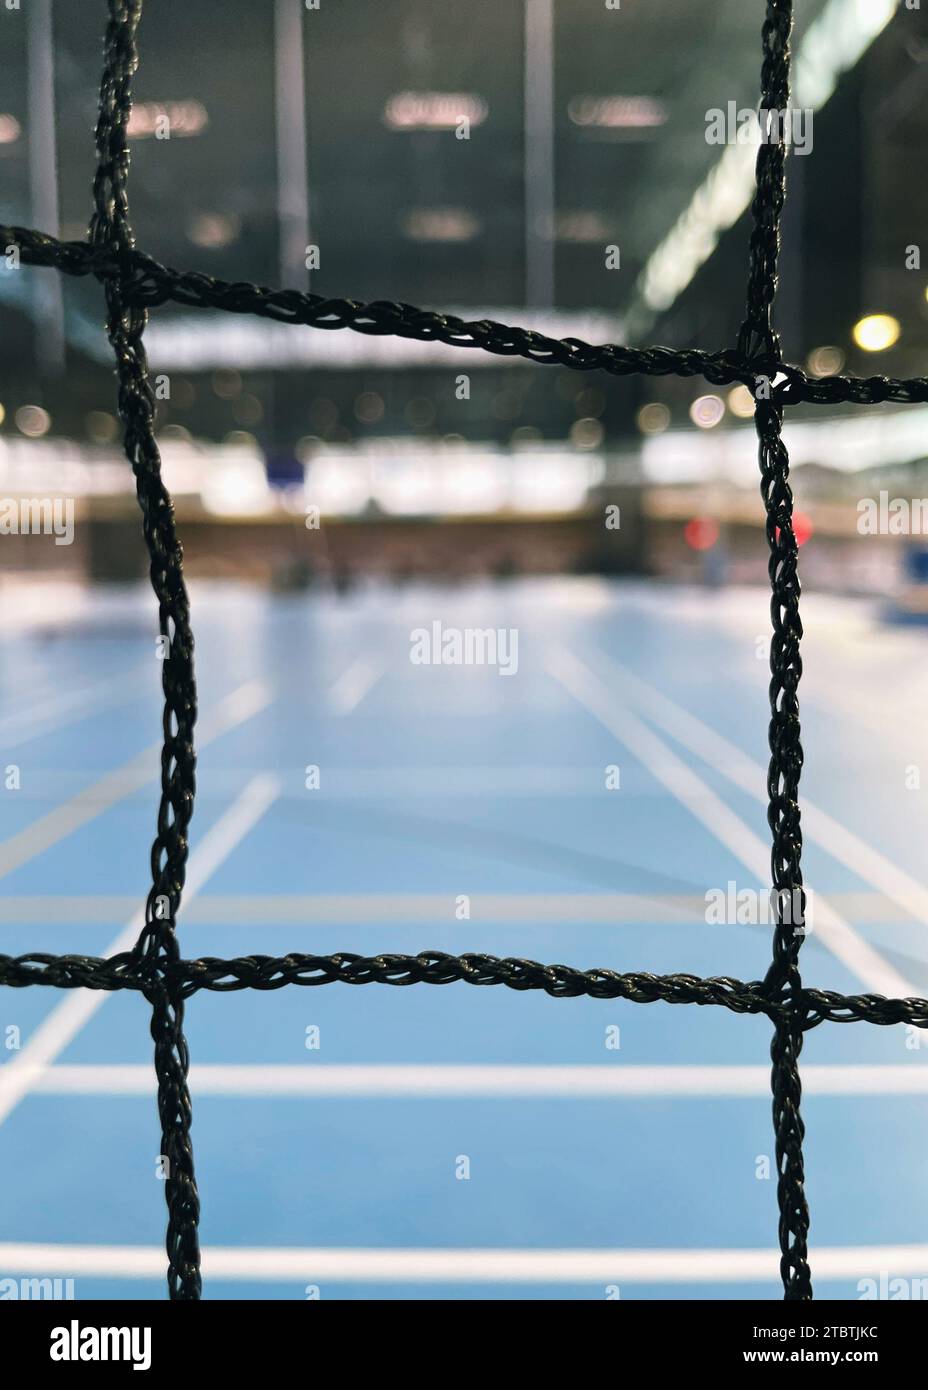 sport netting at an indoor basketball court Stock Photo